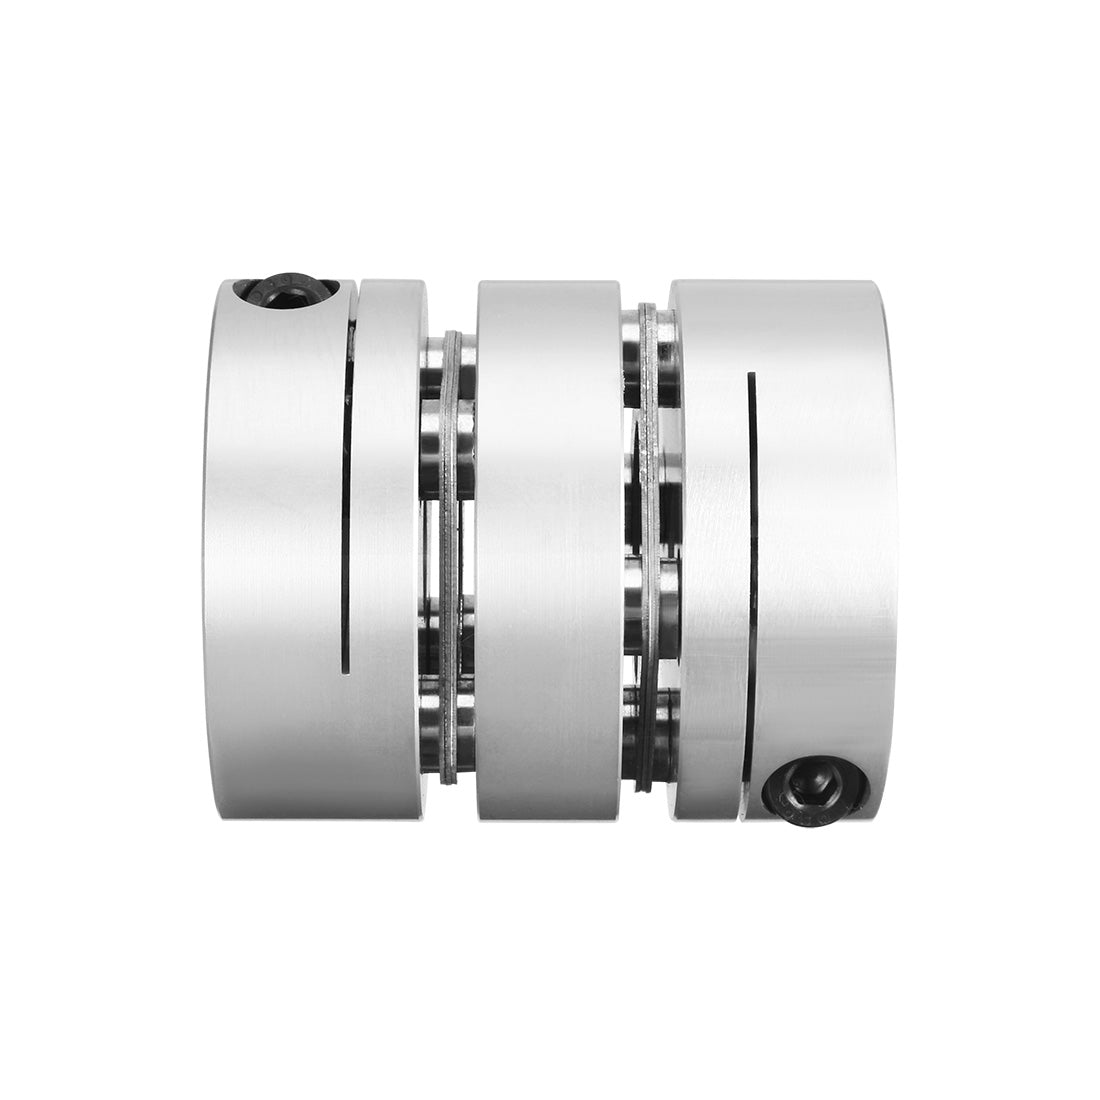 uxcell Uxcell 15mmx15mm Clamp Tight Motor Shaft 2 Diaphragm Coupling accoupler